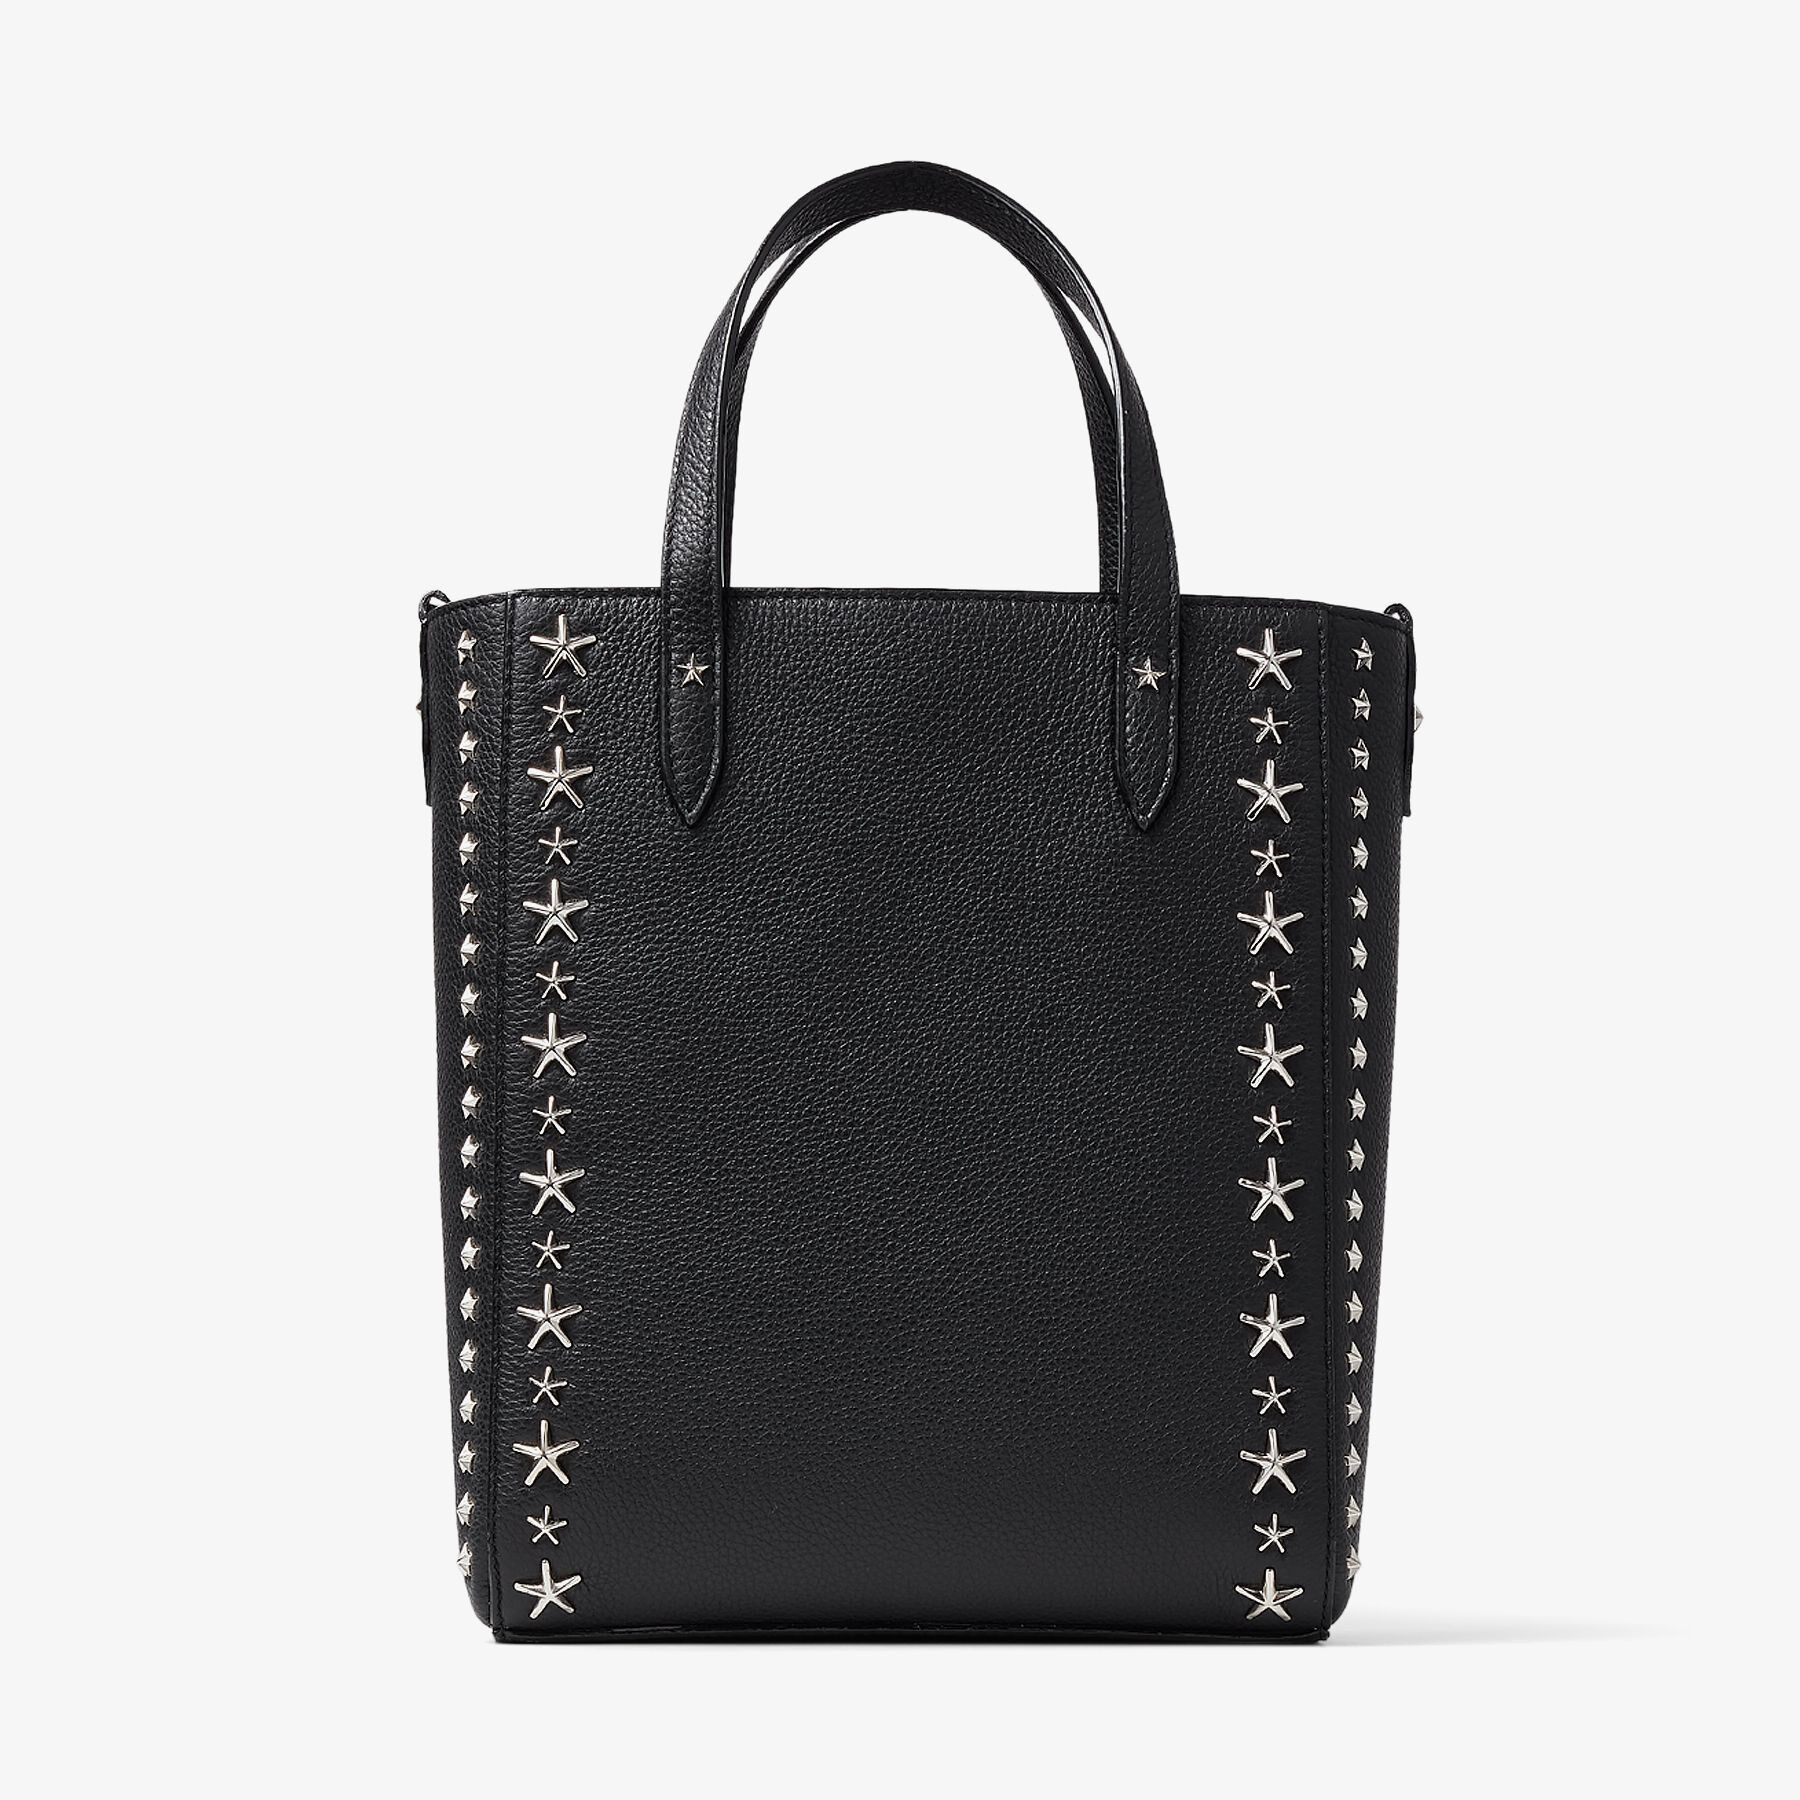 Black Soft Grainy Calf Leather Tote Bag with Stars | PEGASI N/S 